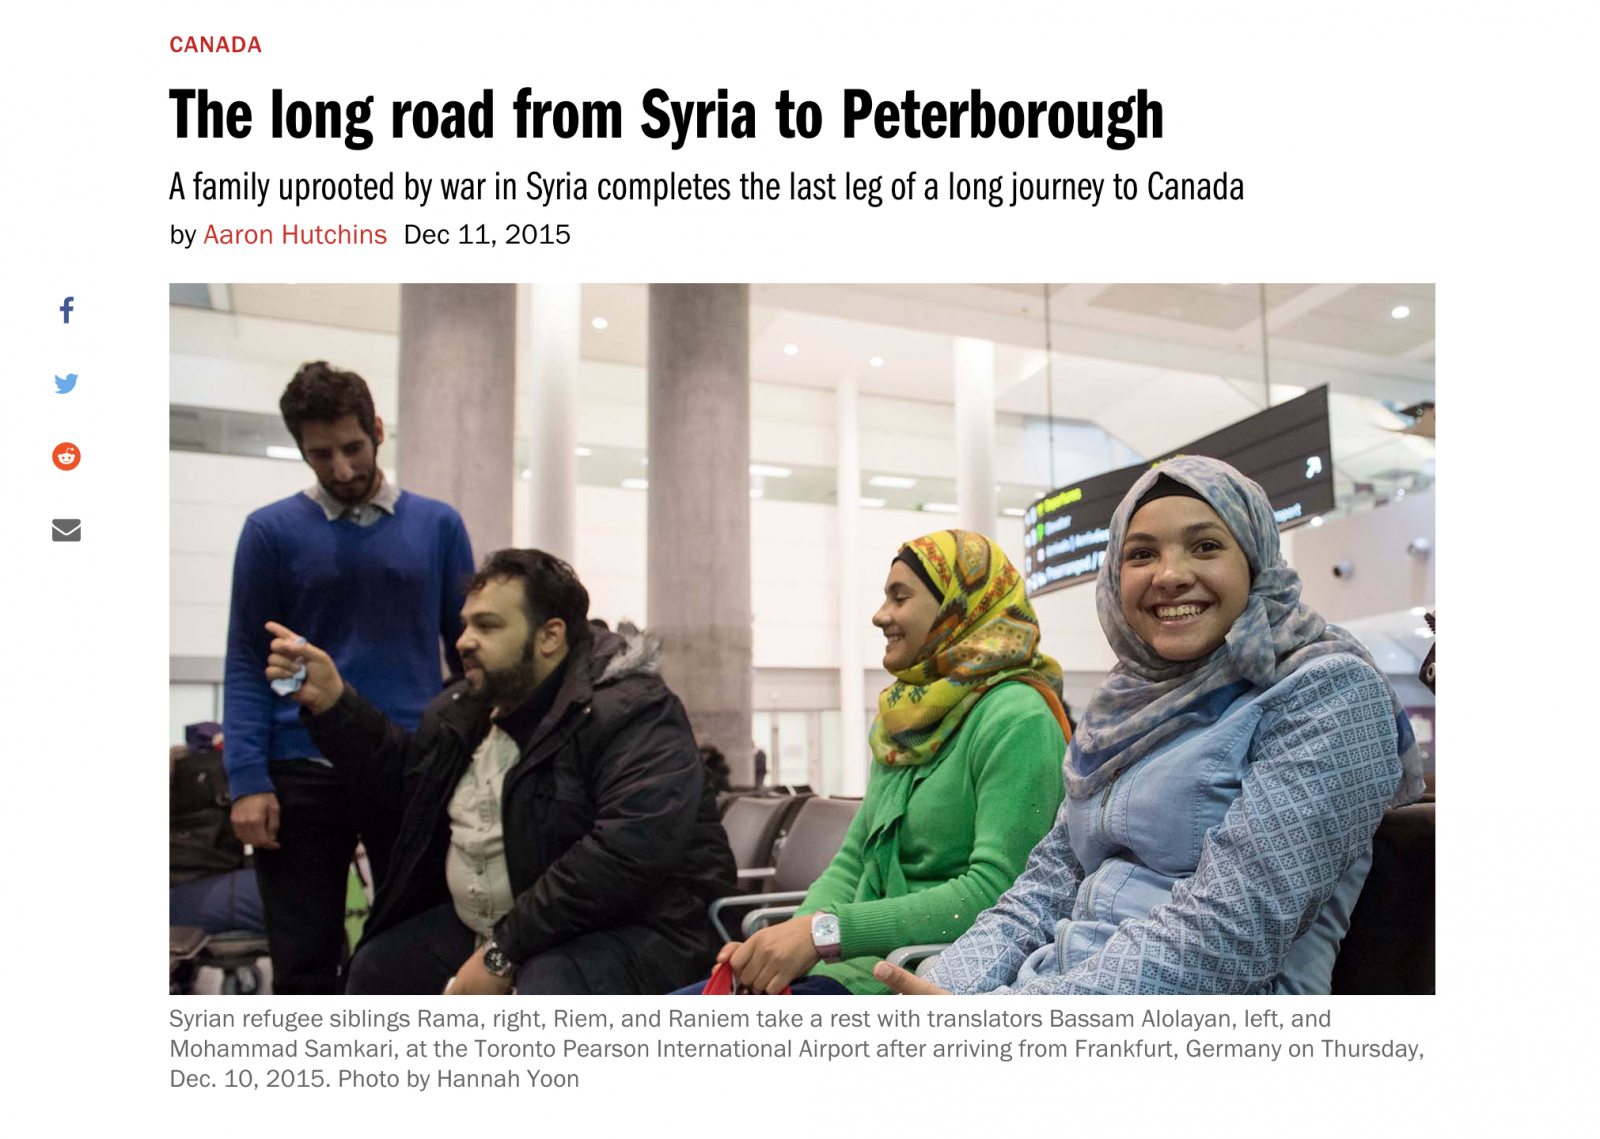 on Macleans: The long road from Syria to Peterborough